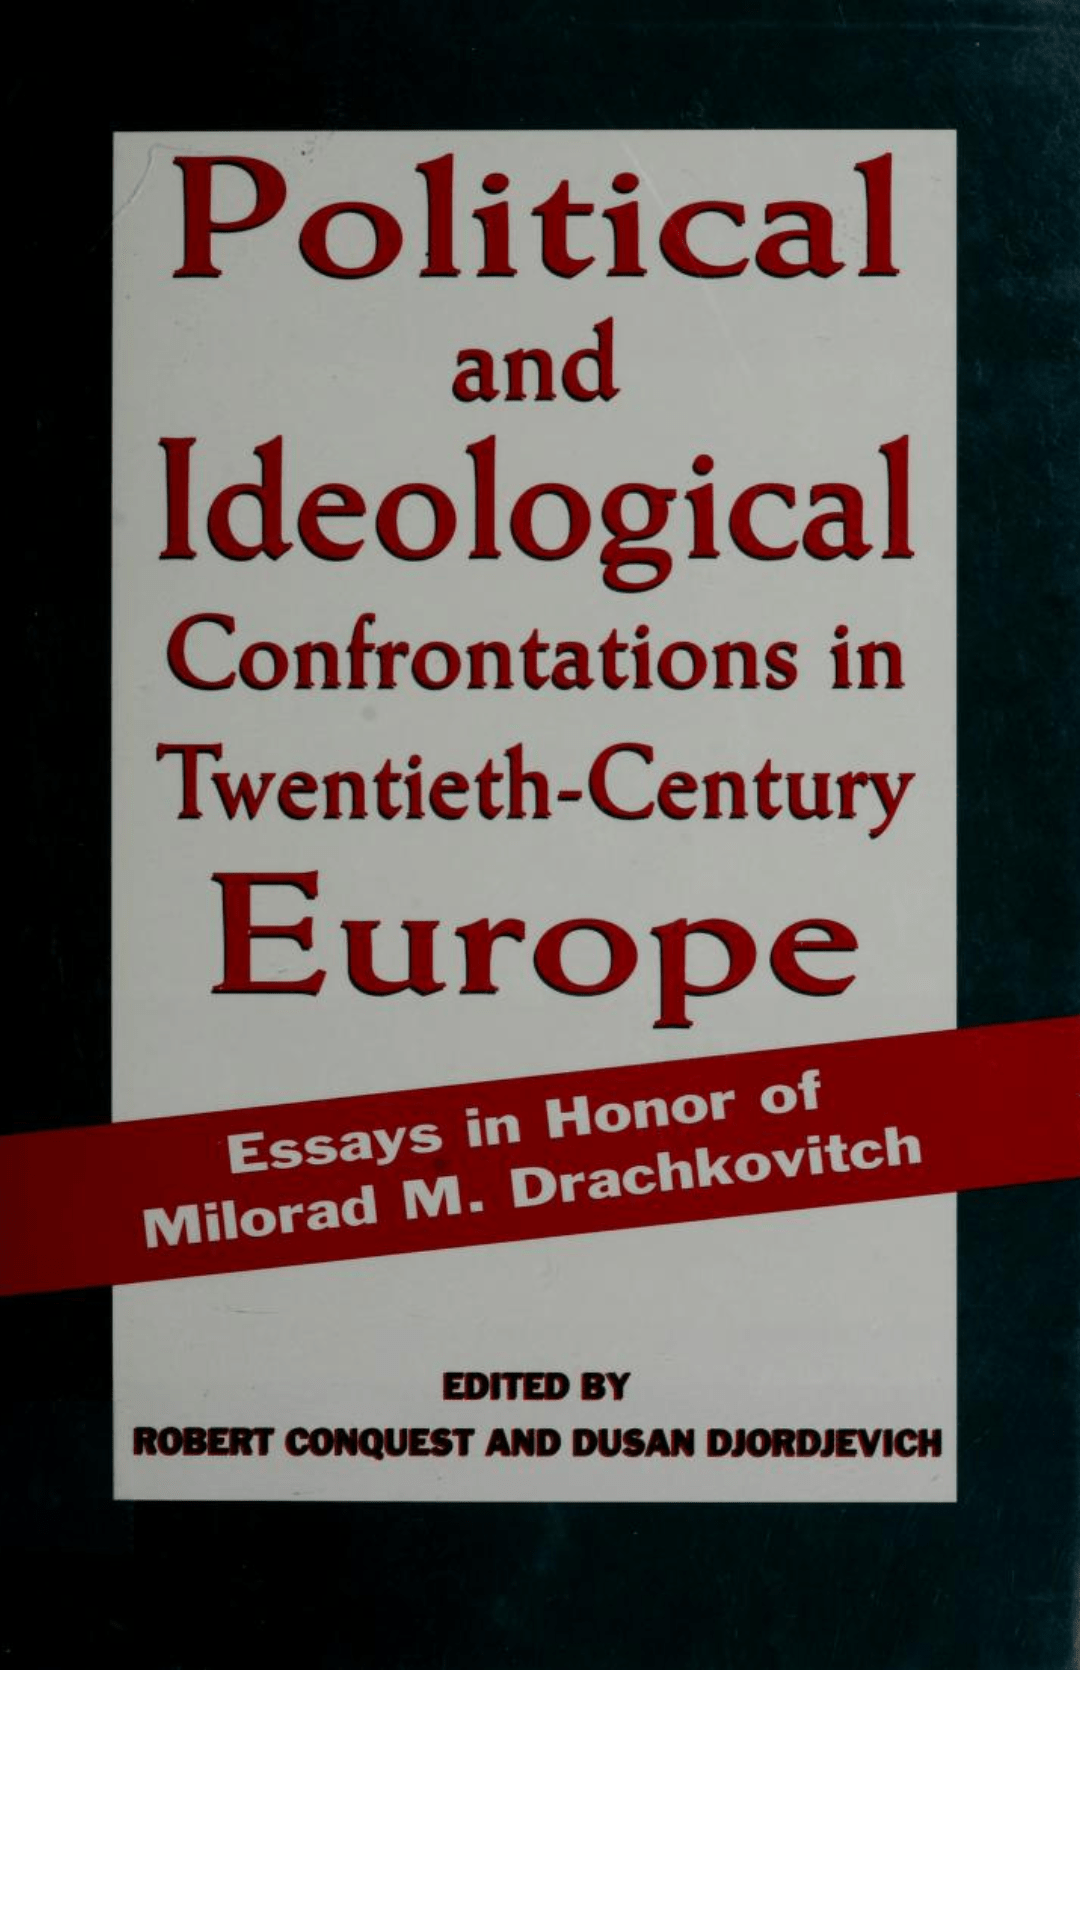 Political and Ideological Confrontations in Twentieth-Century Europe : Essays in Honor of Milorad M. Drachkovitch